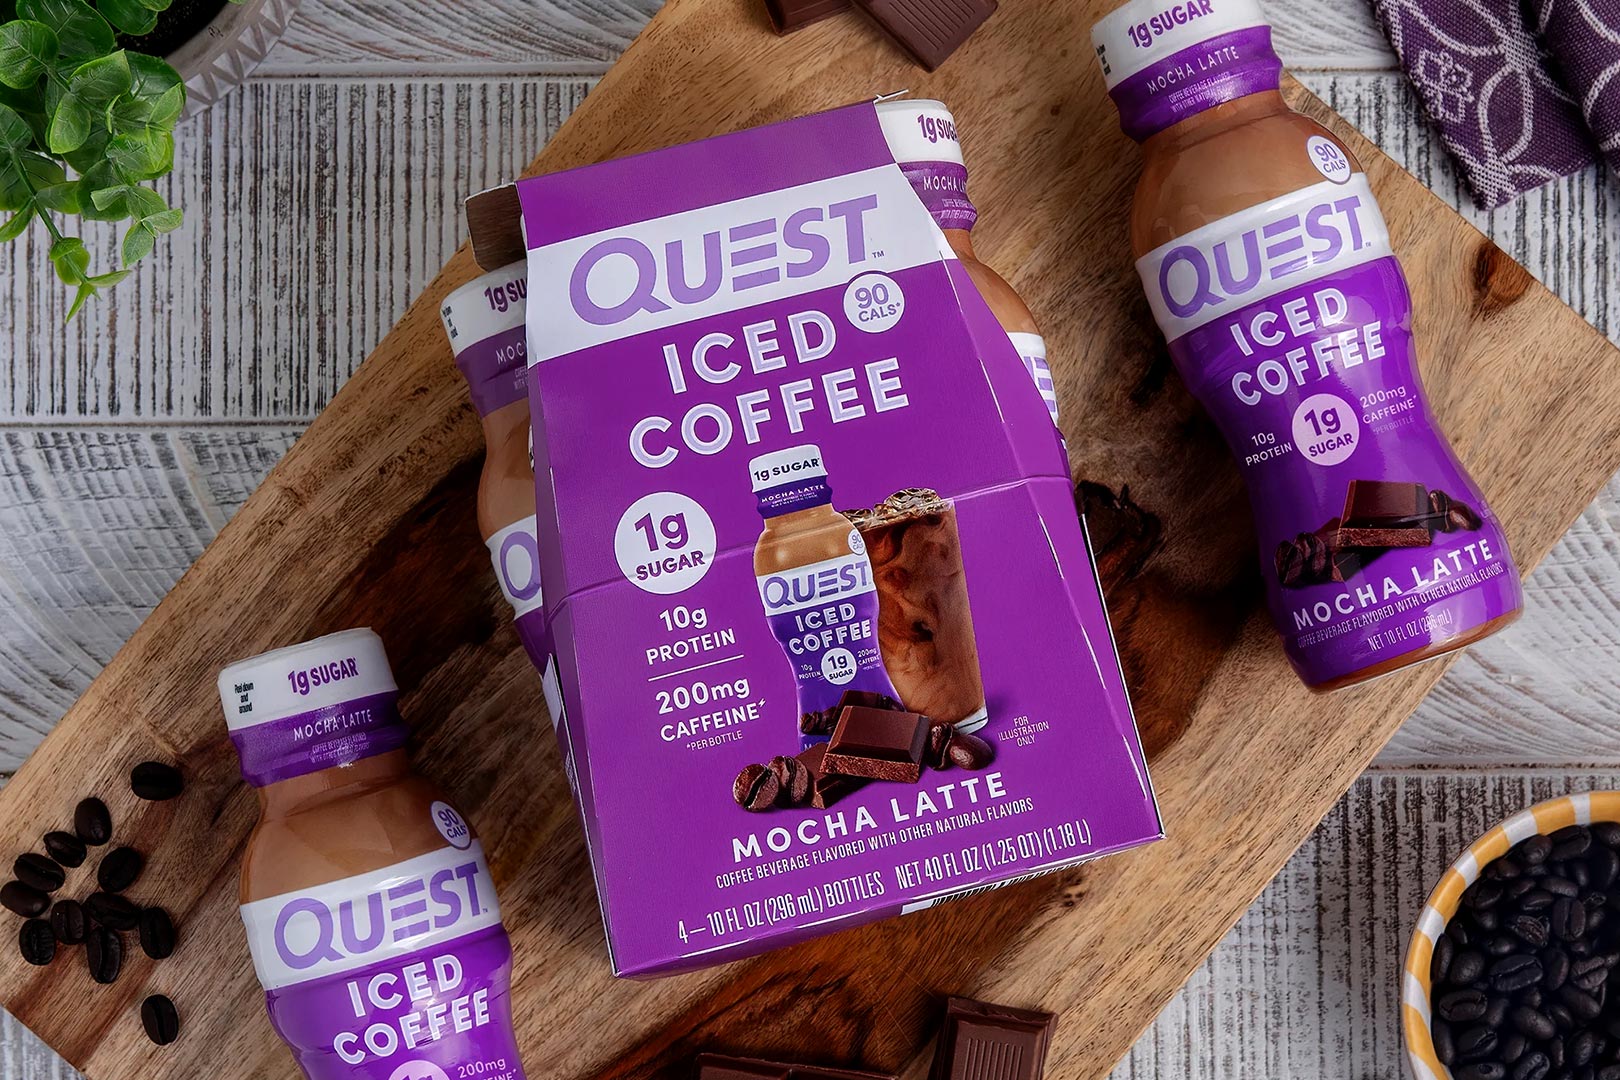 Quest Iced Coffee